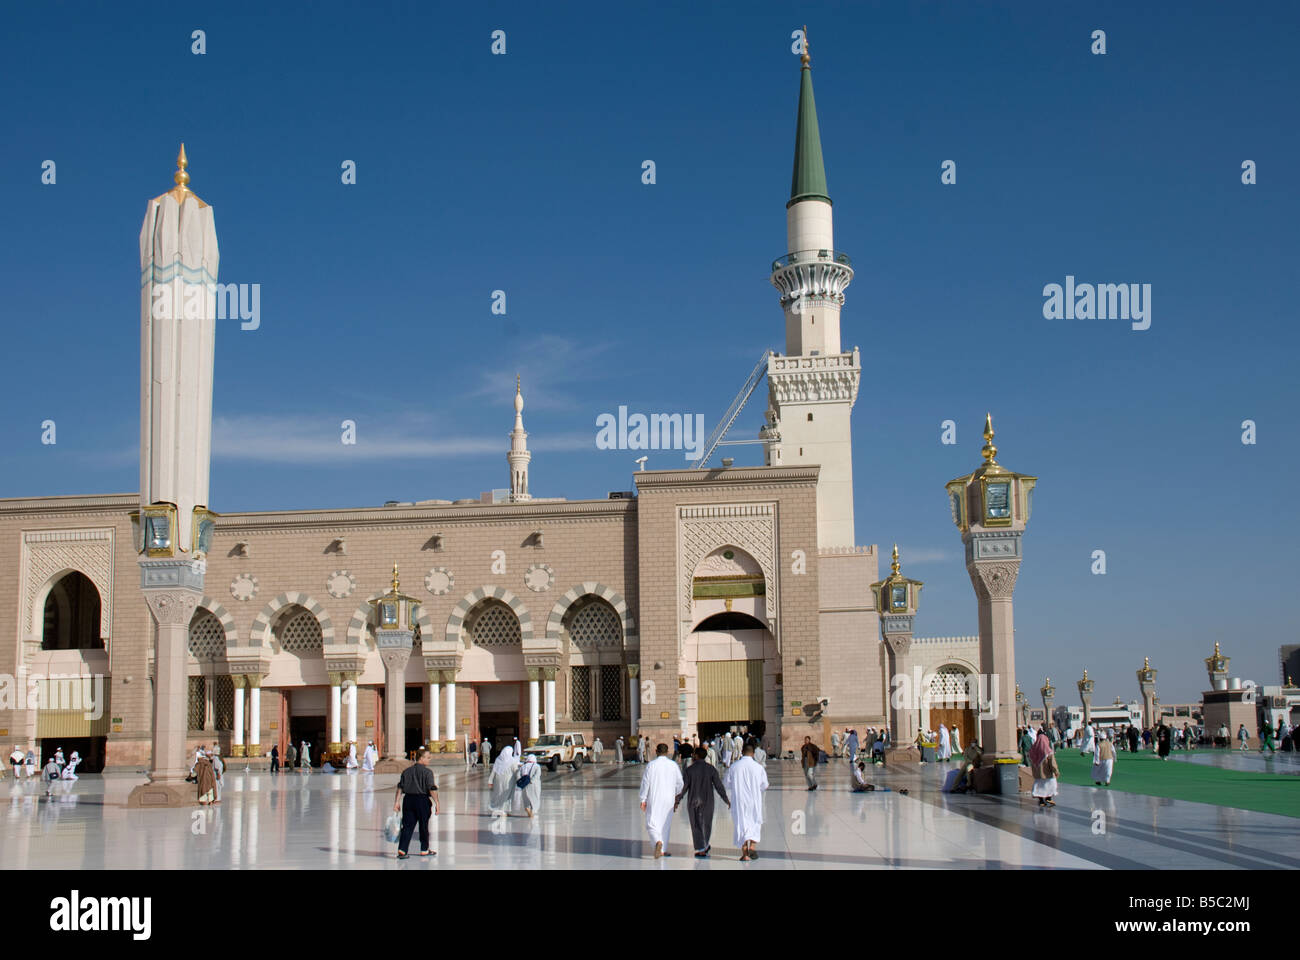 The old Ottoman part of Masjid al Nabawi in Madinah with an old minaret and folded shade umbrella on the left Saudi Arabia Stock Photo